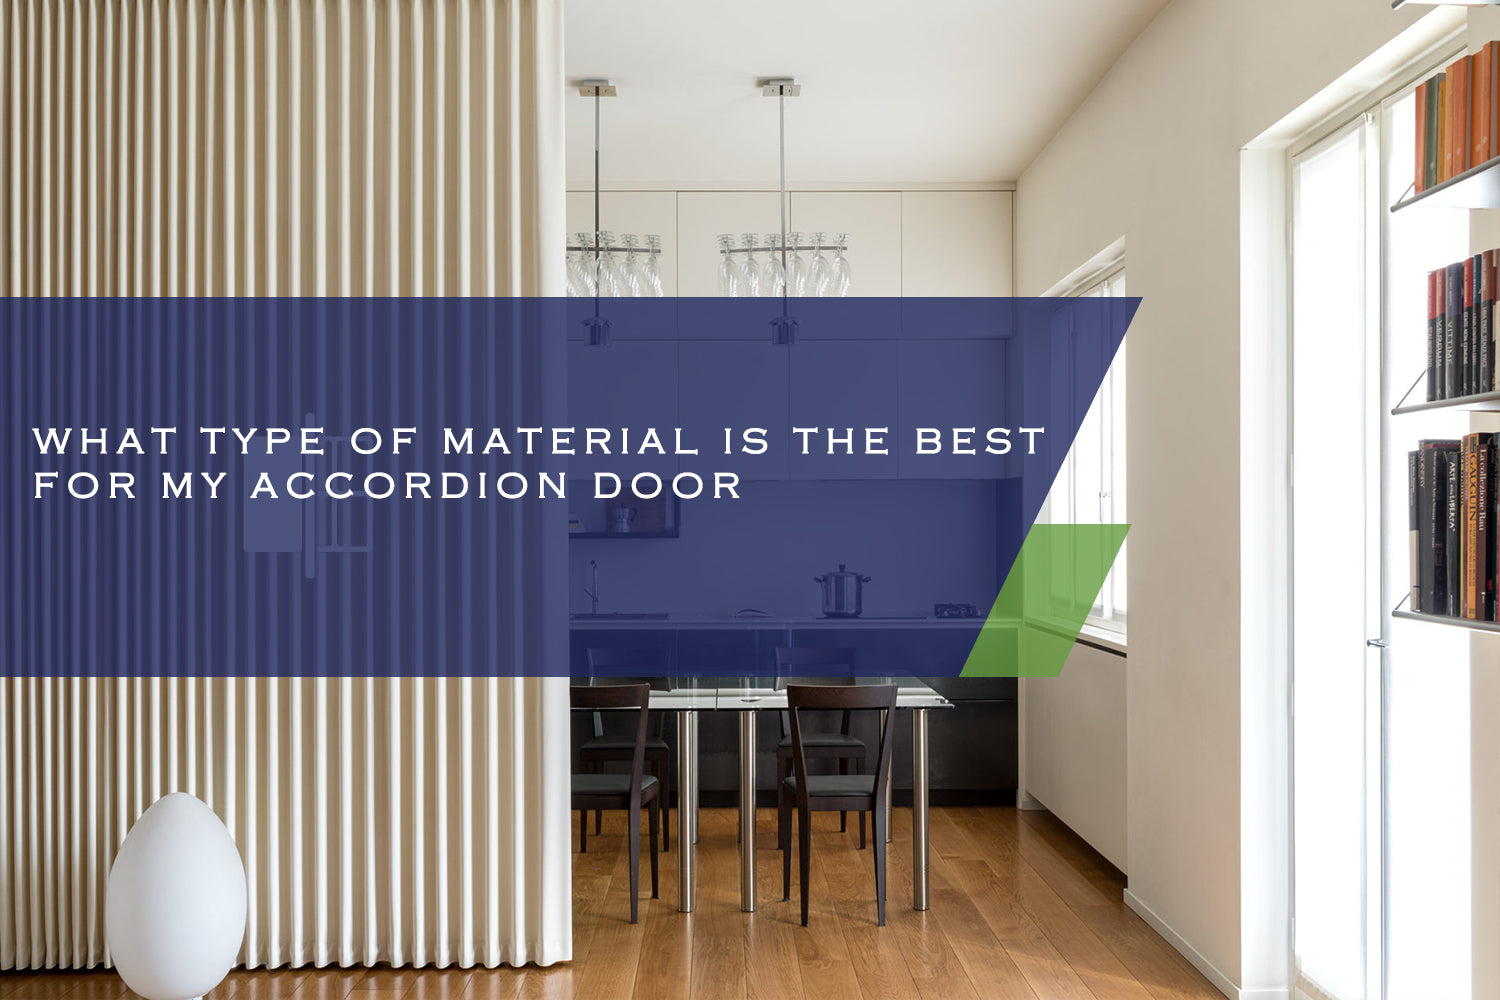 WHAT TYPE OF MATERIAL IS THE BEST FOR MY ACCORDION DOOR?